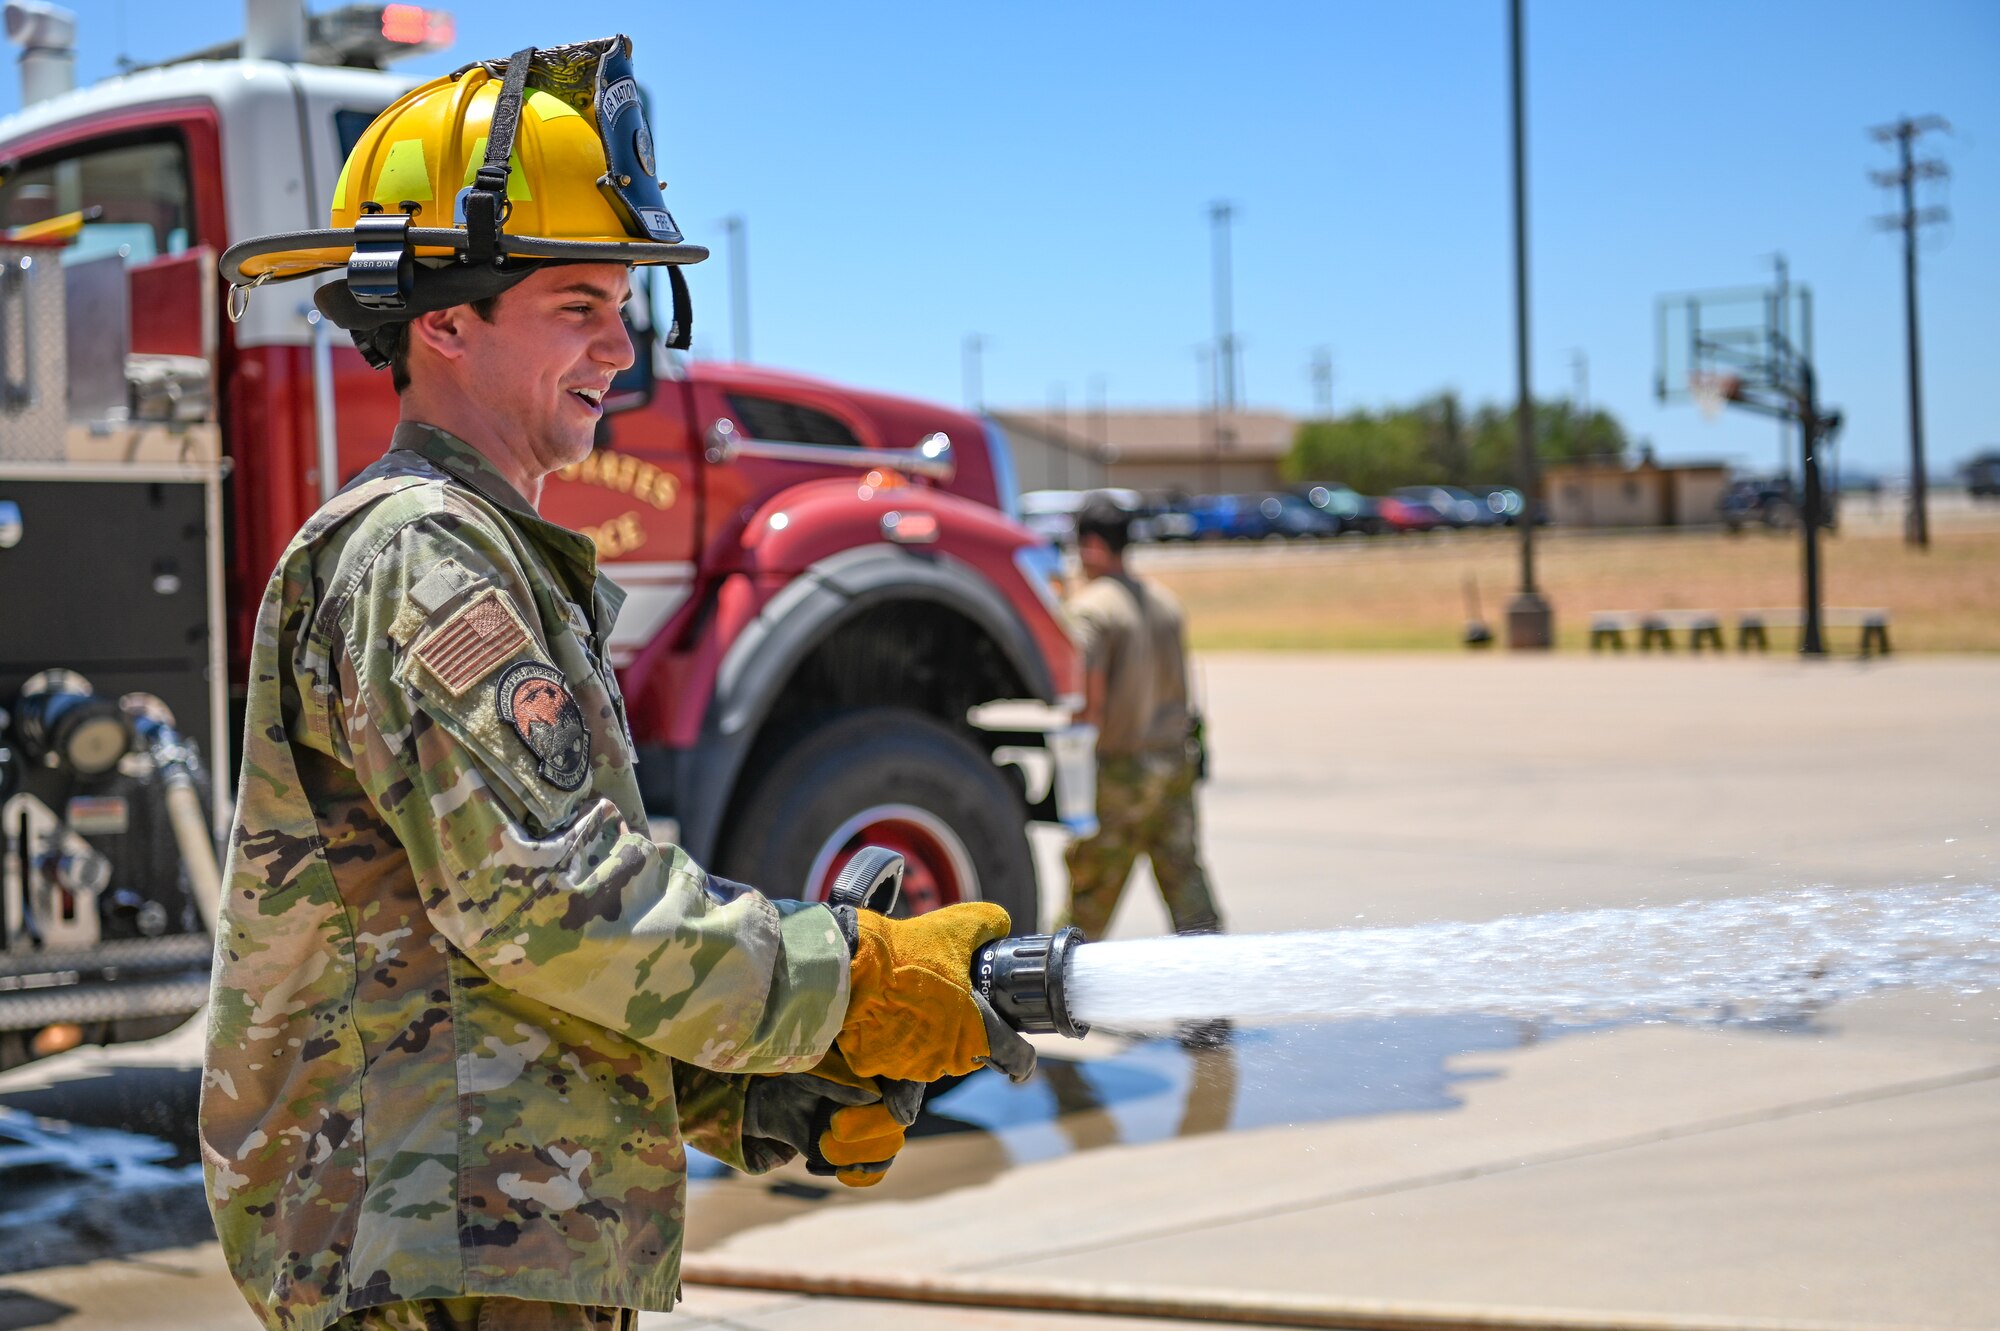 Angelo Donisi, Montana State University Air Force ROTC cadet, uses a fire hose during Project Tuskegee 2.0 at Dyess Air Force Base, Texas, Aug. 1, 2023. The project is intended to increase the cadets' understanding of Air Force and Space Force missions and day-to-day operations. The 19 cadets in attendance represent 19 different Air Force ROTC detachments across the enterprise's four regions. (U.S. Air Force photo by Airman 1st Class Emma Anderson)